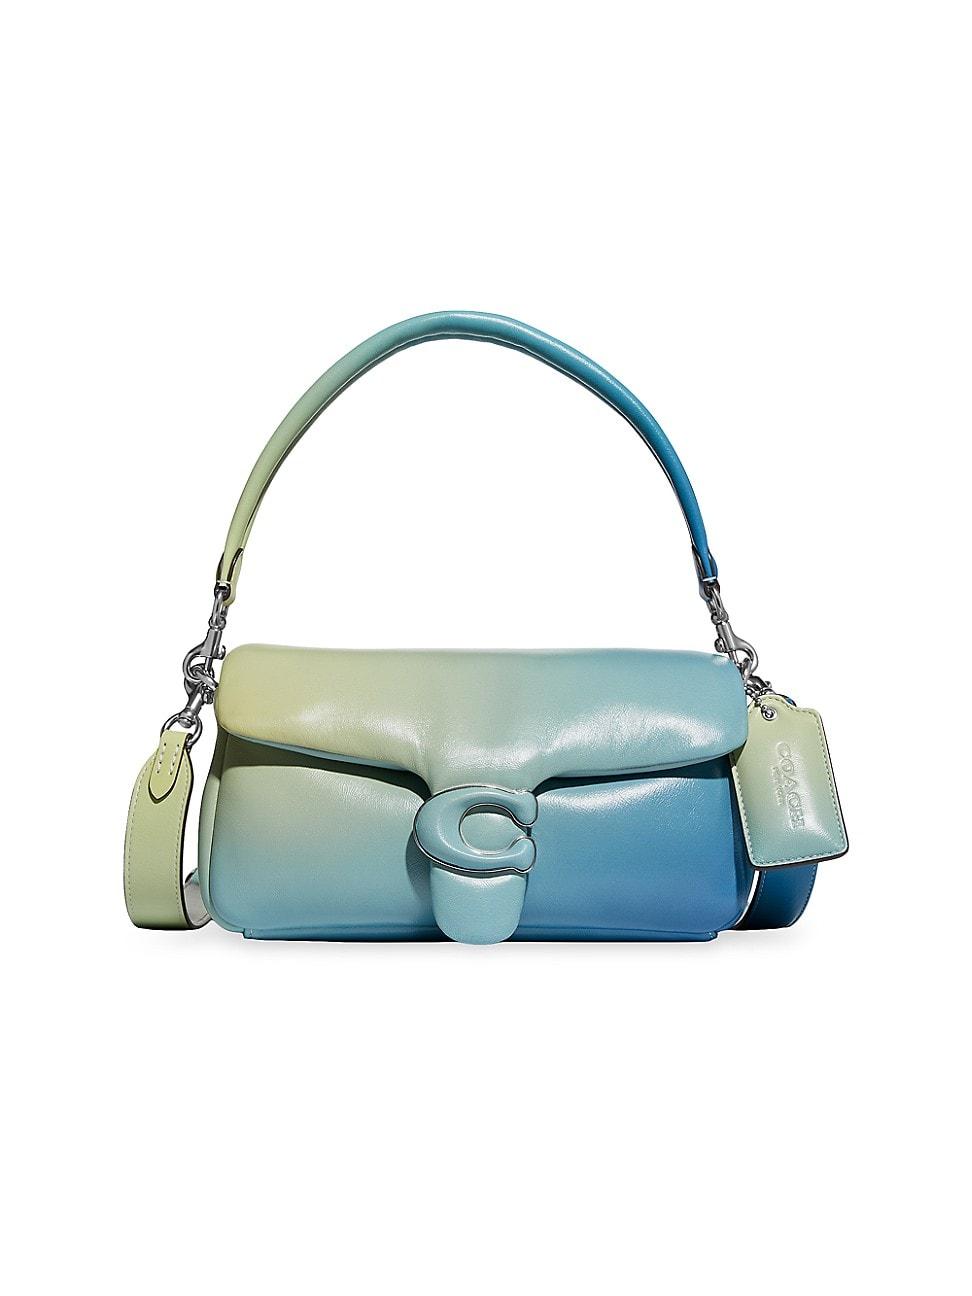 COACH Pillow Tabby Ombré Leather Shoulder Bag in Blue